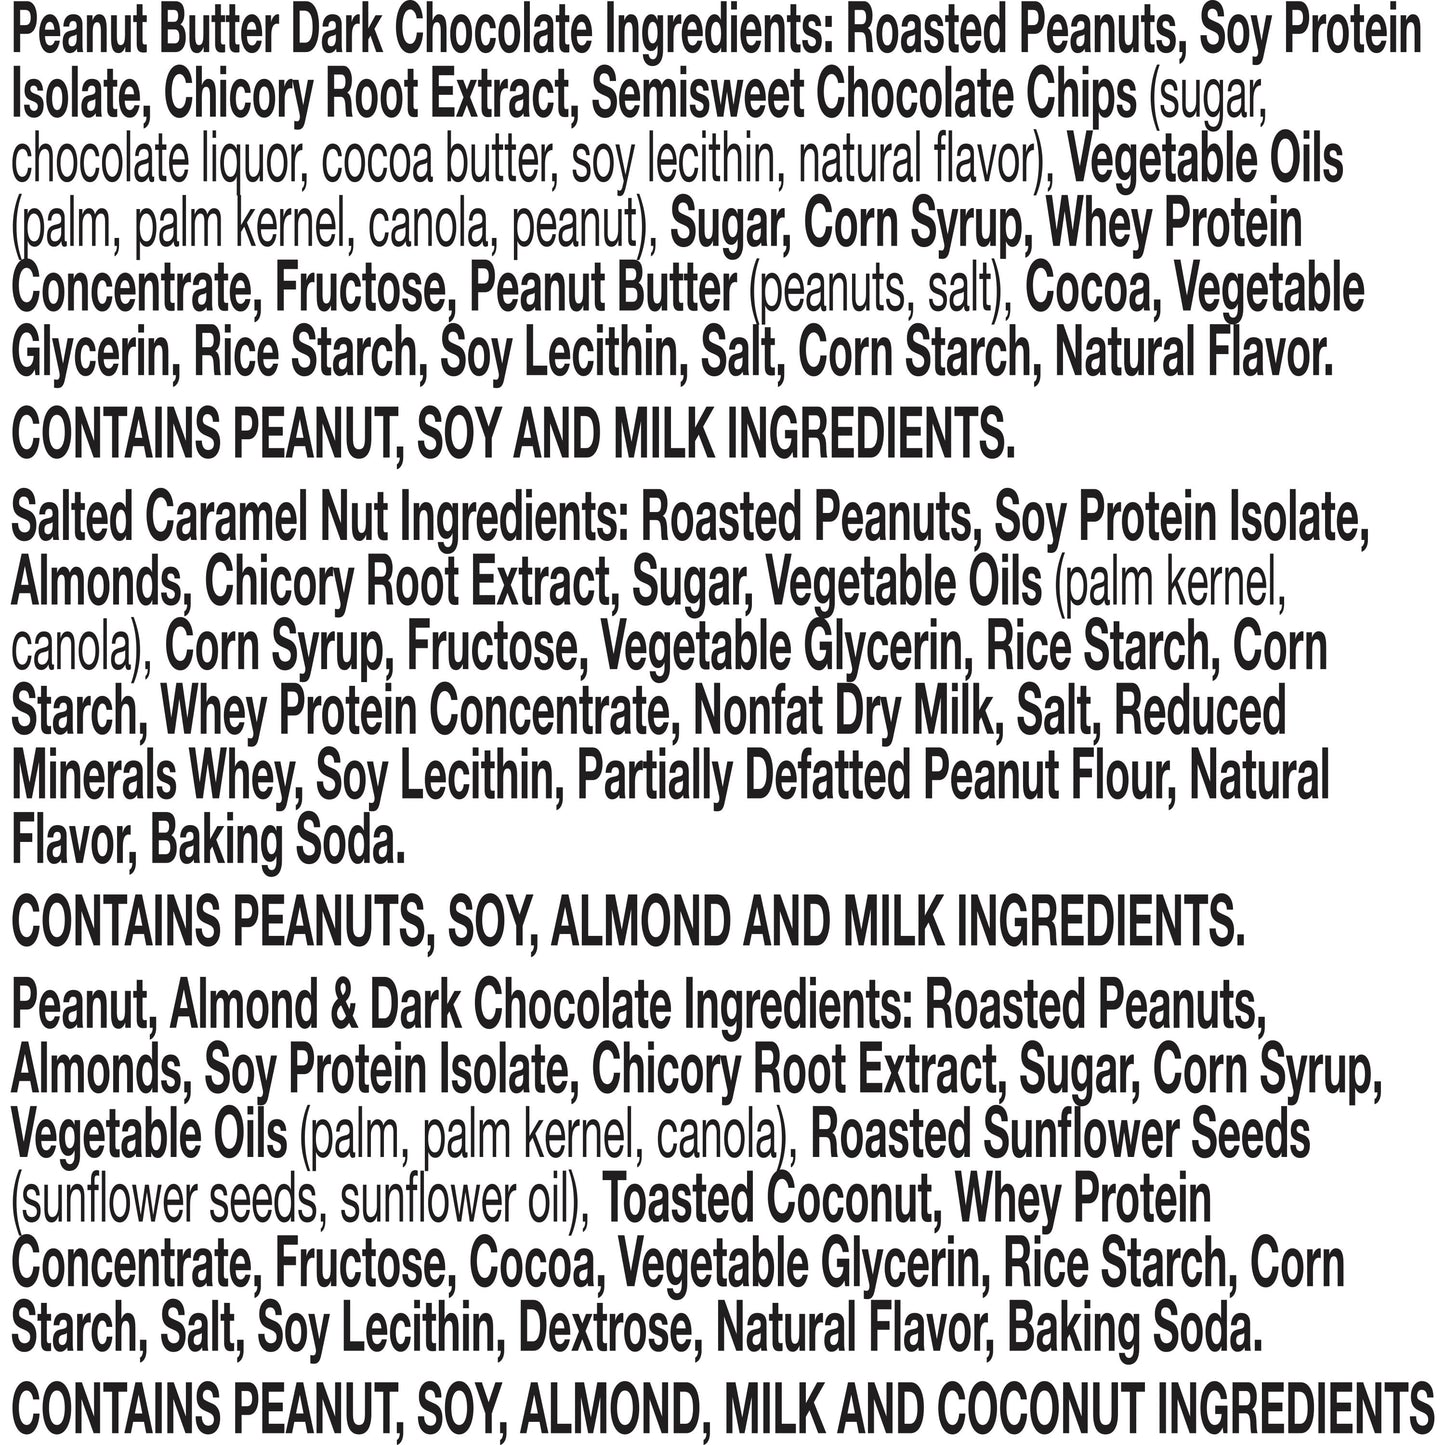 Nature Valley Protein Granola Bars, Snack Variety Pack, Chewy Bars, 15 ct, 21.3 OZ